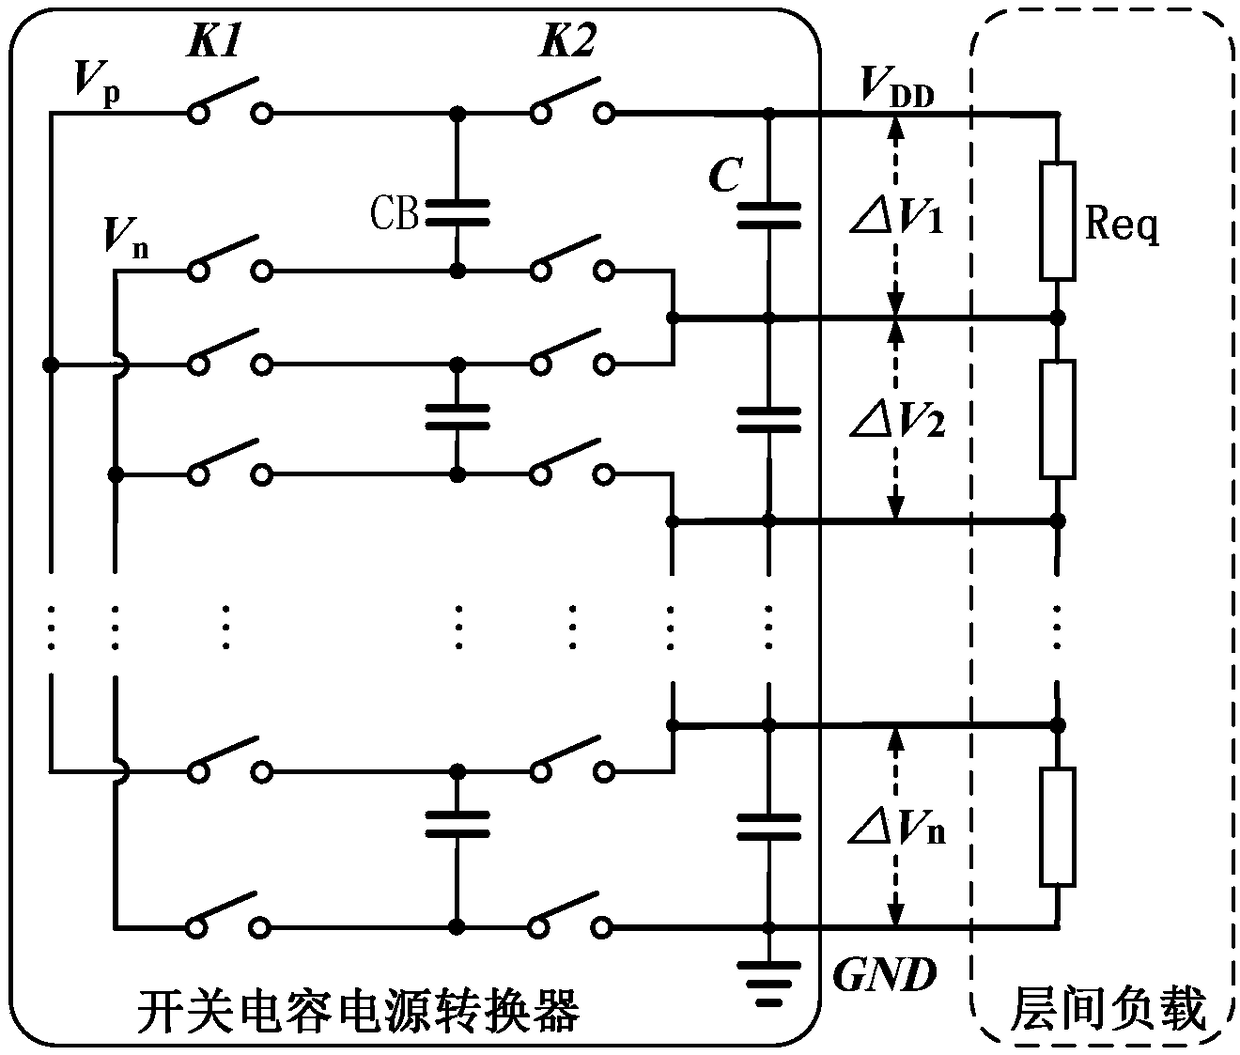 Multi-output switched capacitor converter applicable for multi-layer stacked loads